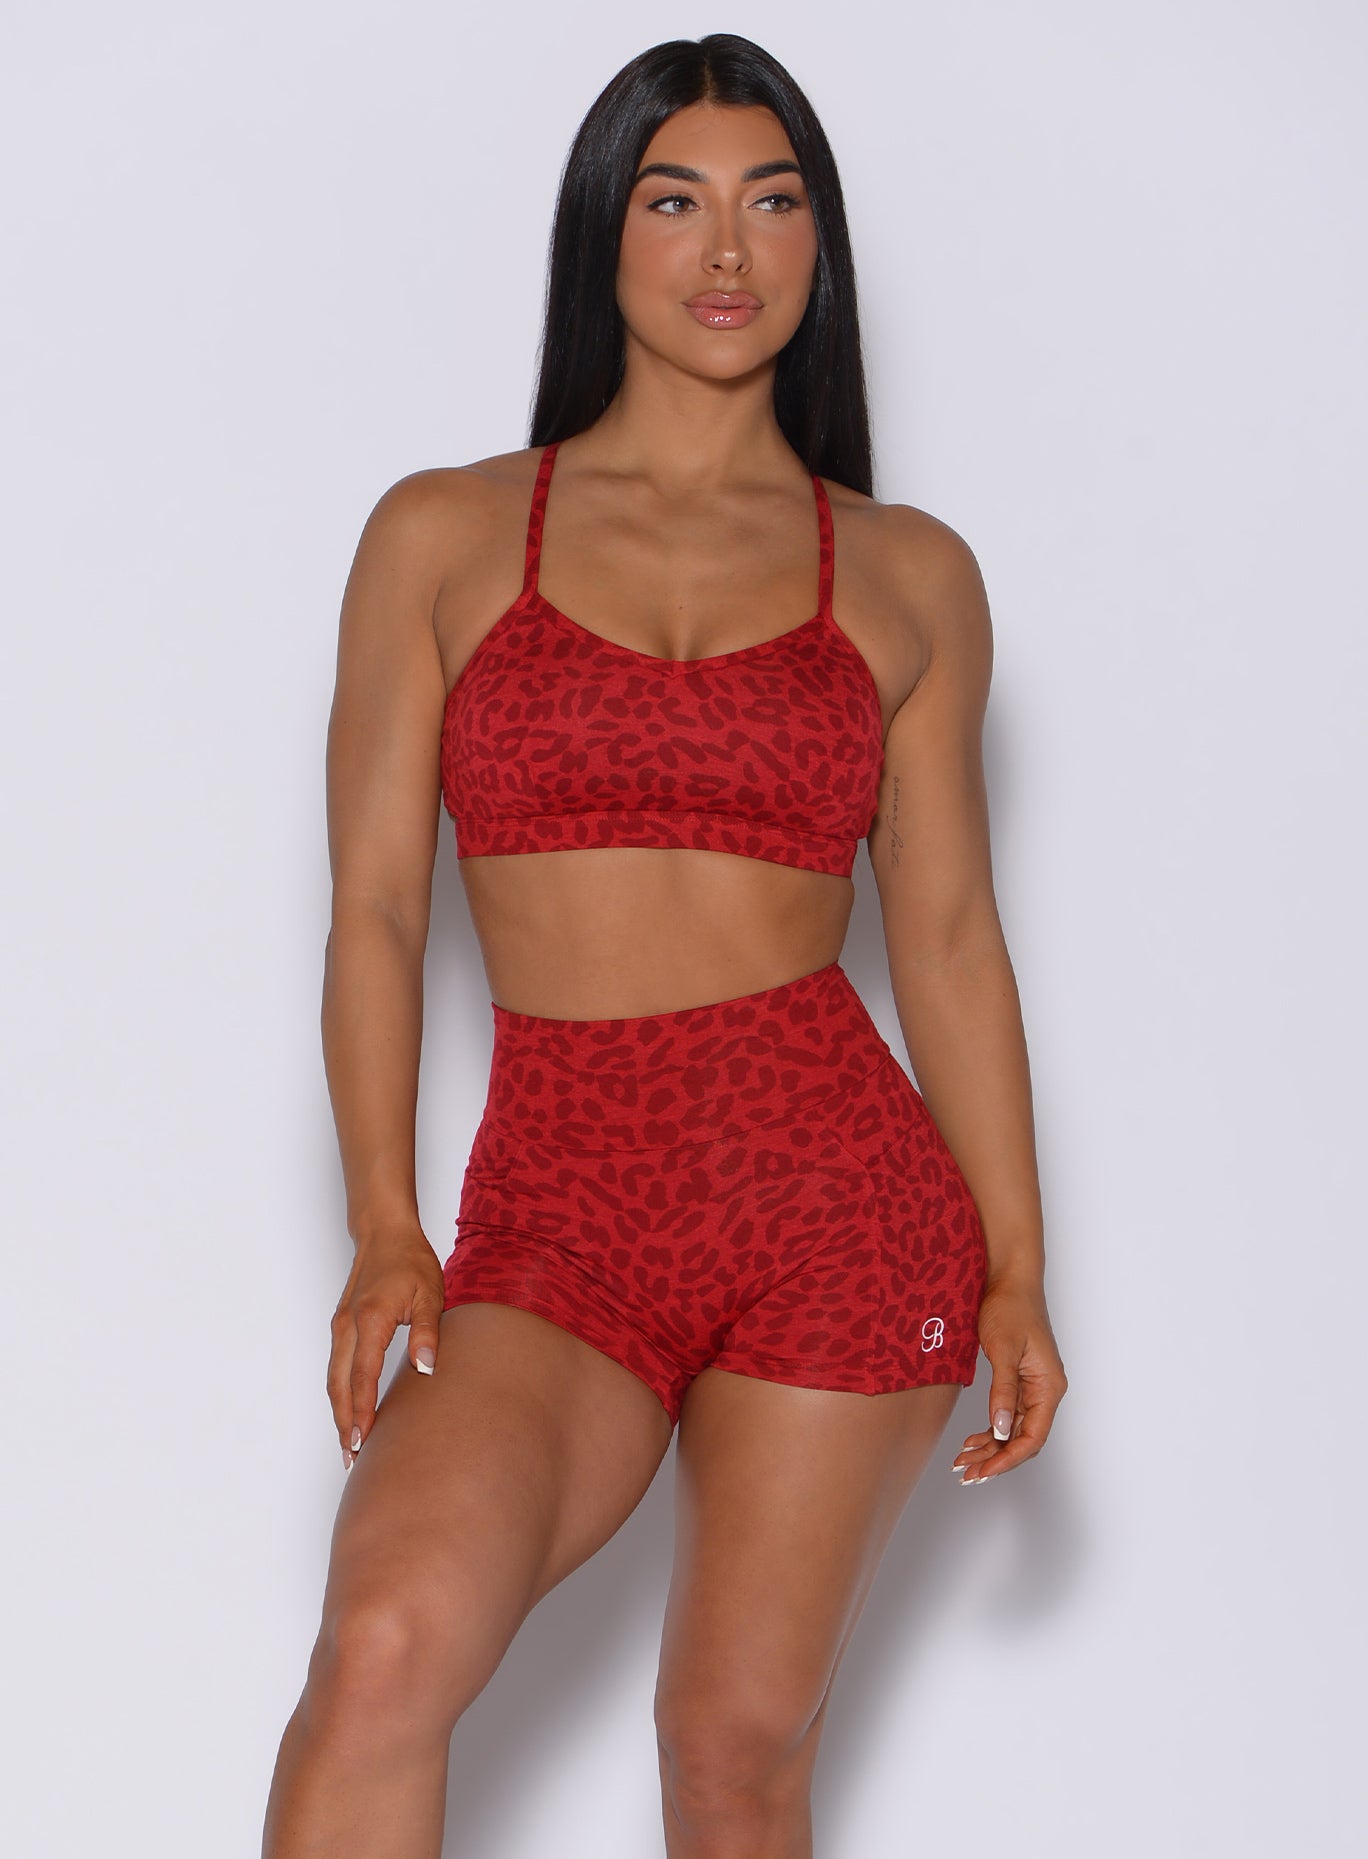 Front profile view of a model in our pumped sports bra in red cheetah color and matching shorts